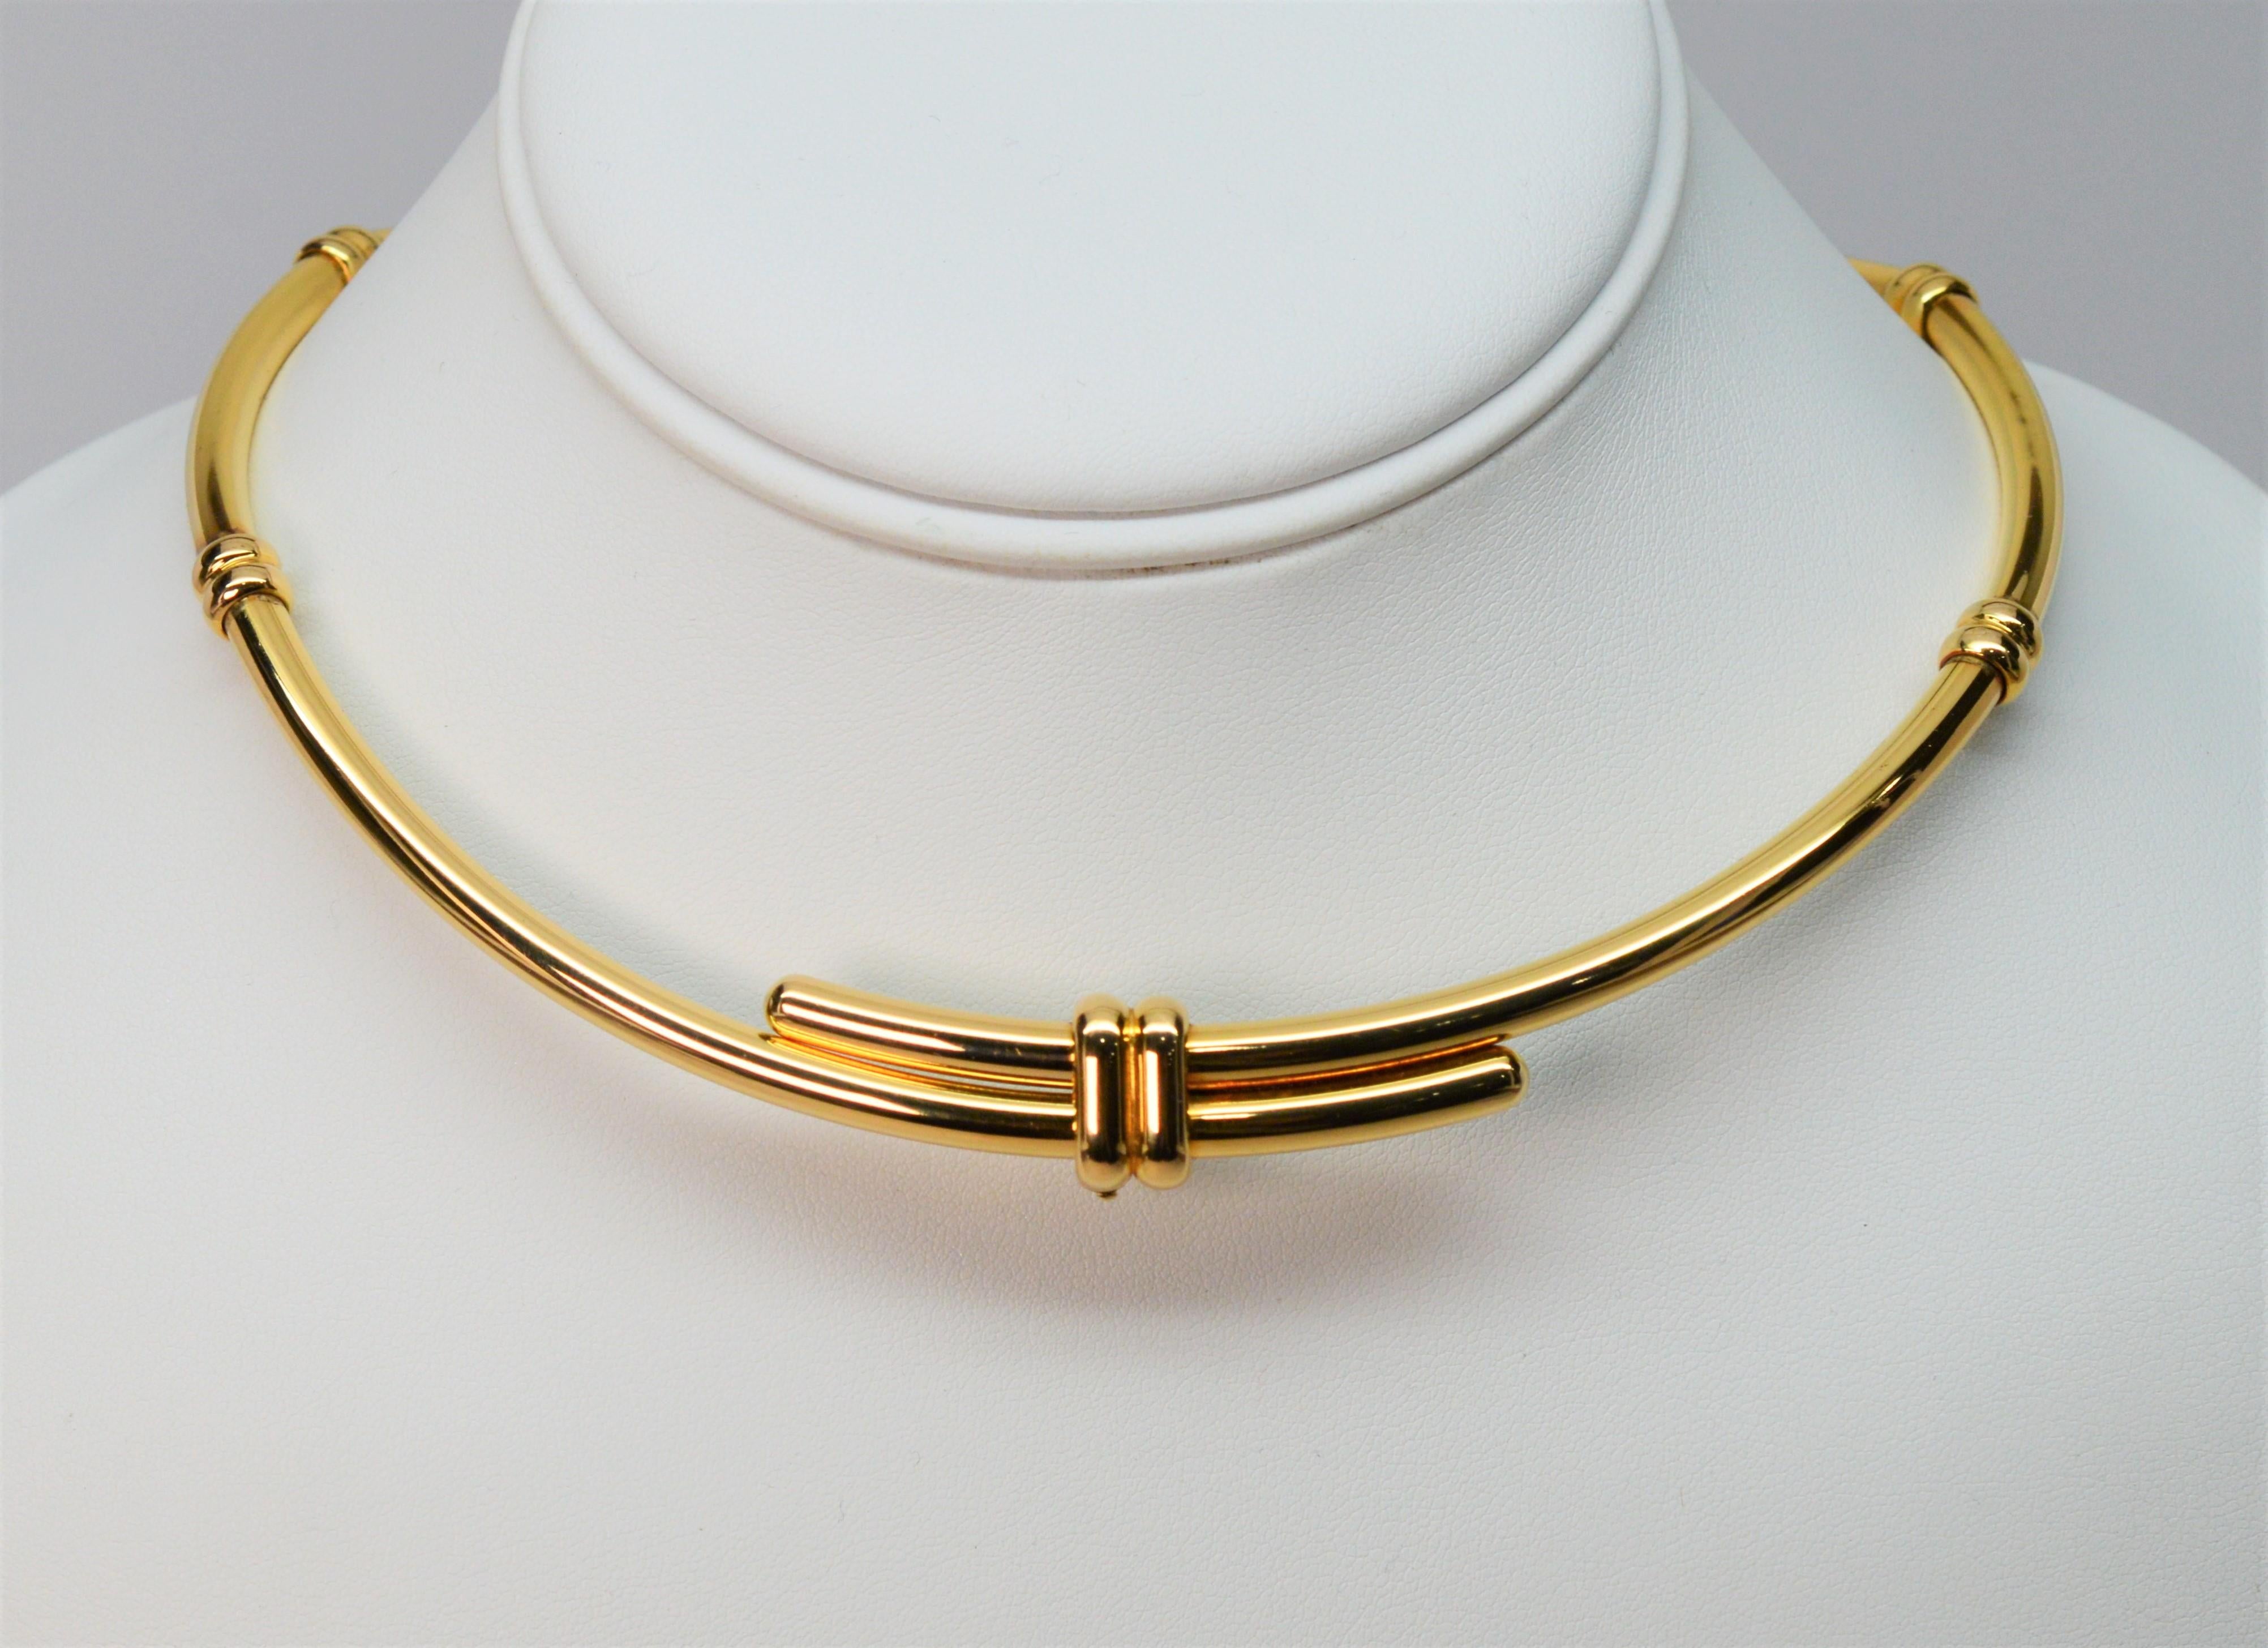 A contemporary crossover knot is the focal point and acts as a hidden clasp on this sleek necklace design by Chaumet of Paris. Made of polished eighteen karat 18k yellow gold, this choker style necklace is engineered with precisely matched hinged